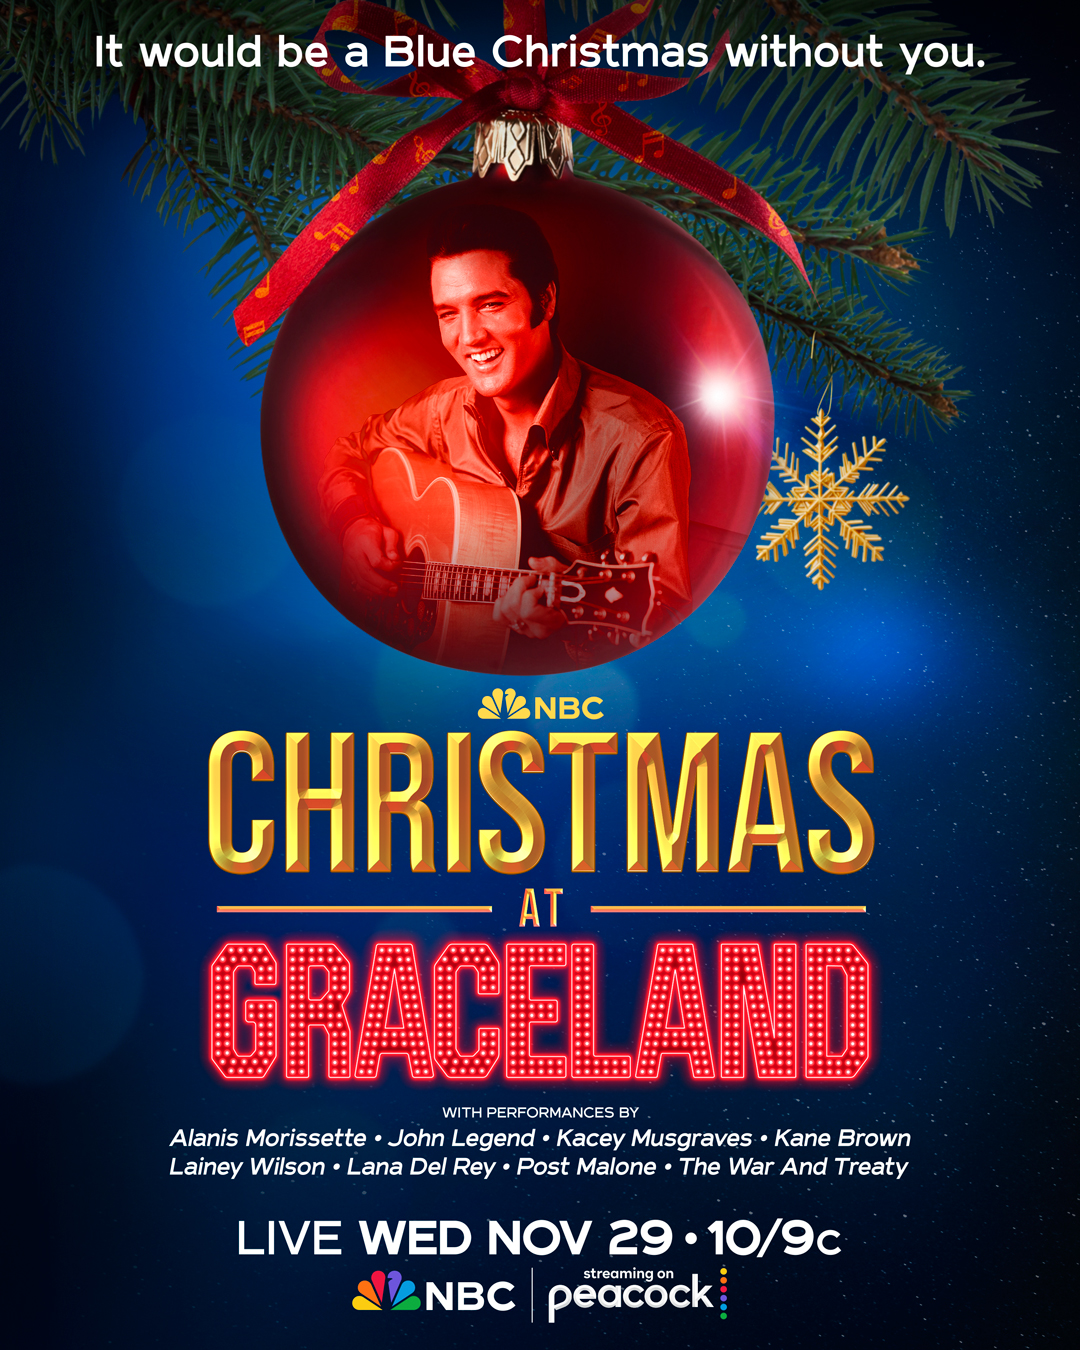 Elvis Presley on X: "We are excited to share the performers for @nbc's “ Christmas at Graceland” special live from @VisitGraceland on Nov. 29! The  special will air immediately following NBC's annual presentation